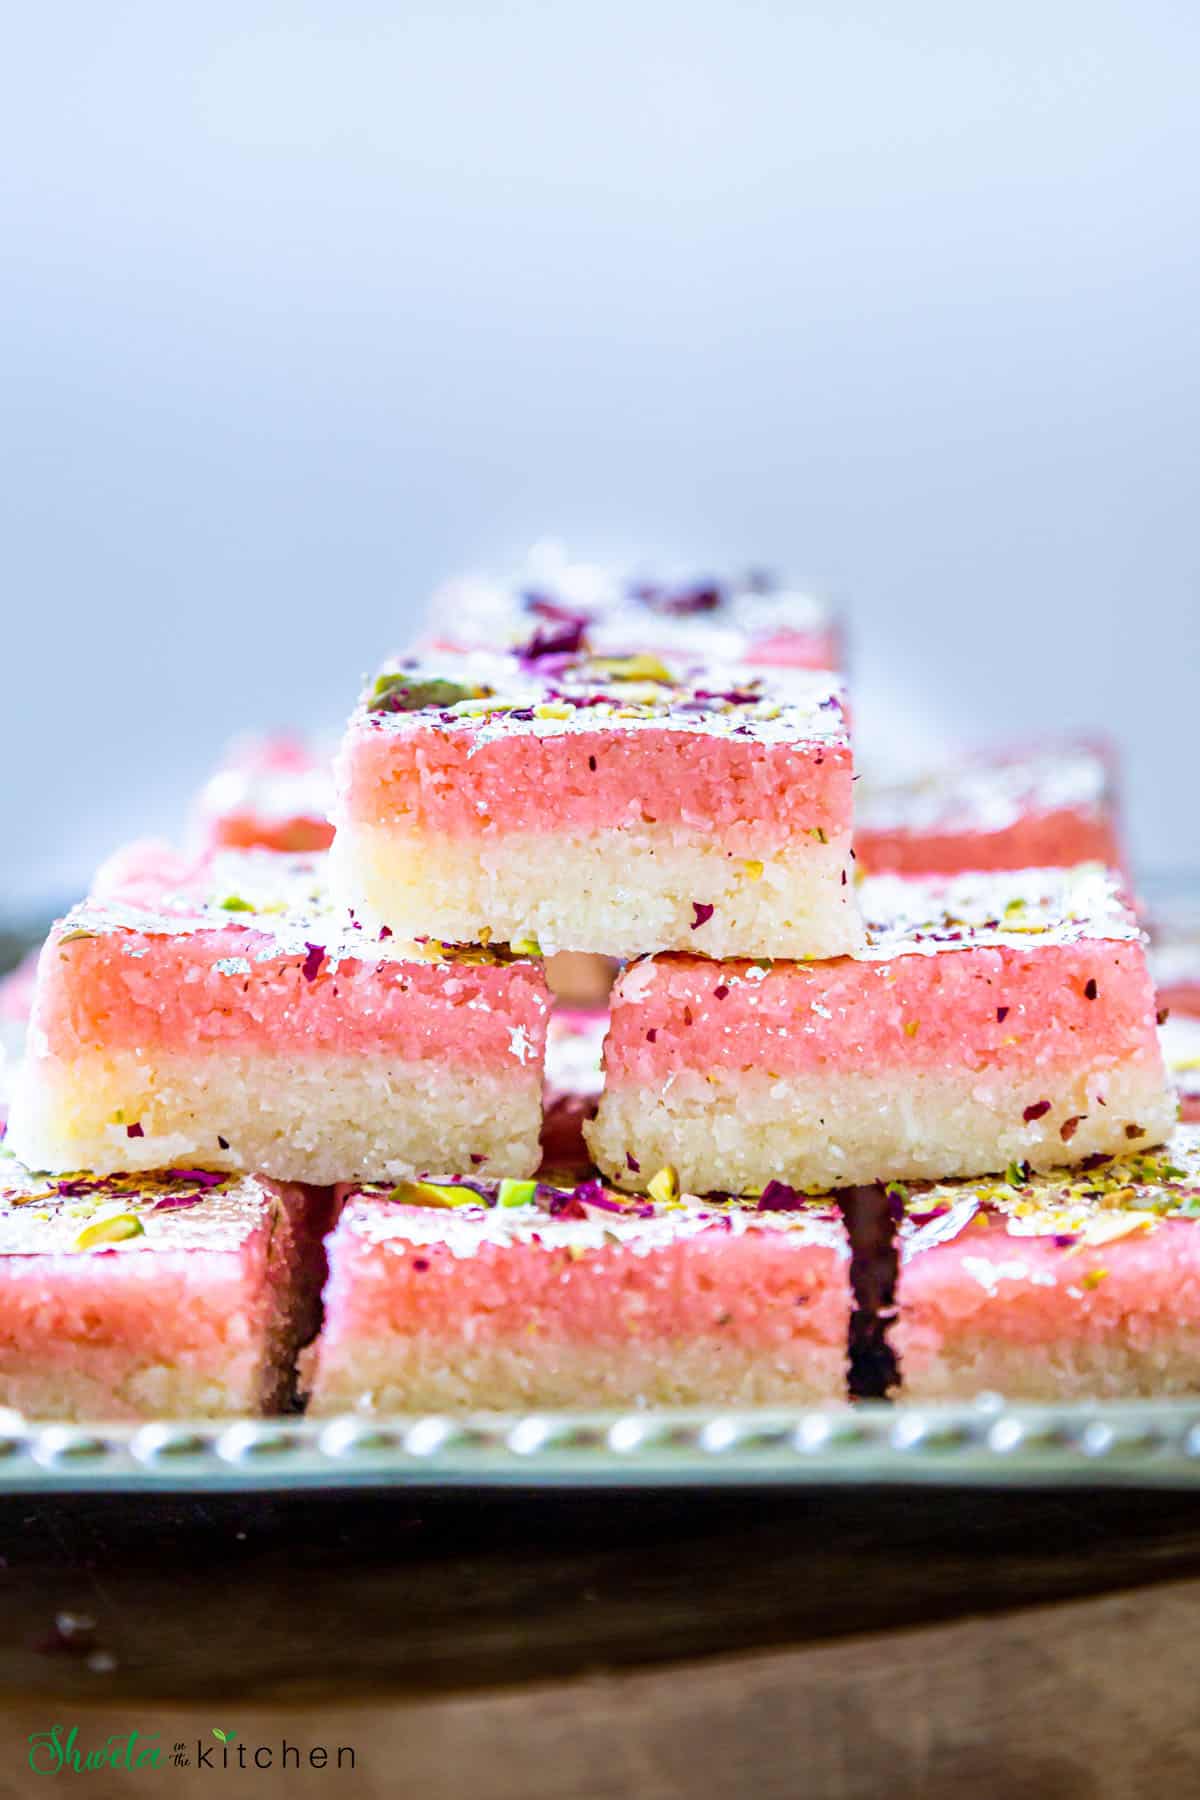 Side view of double layered Coconut barfi showing pink and white layers